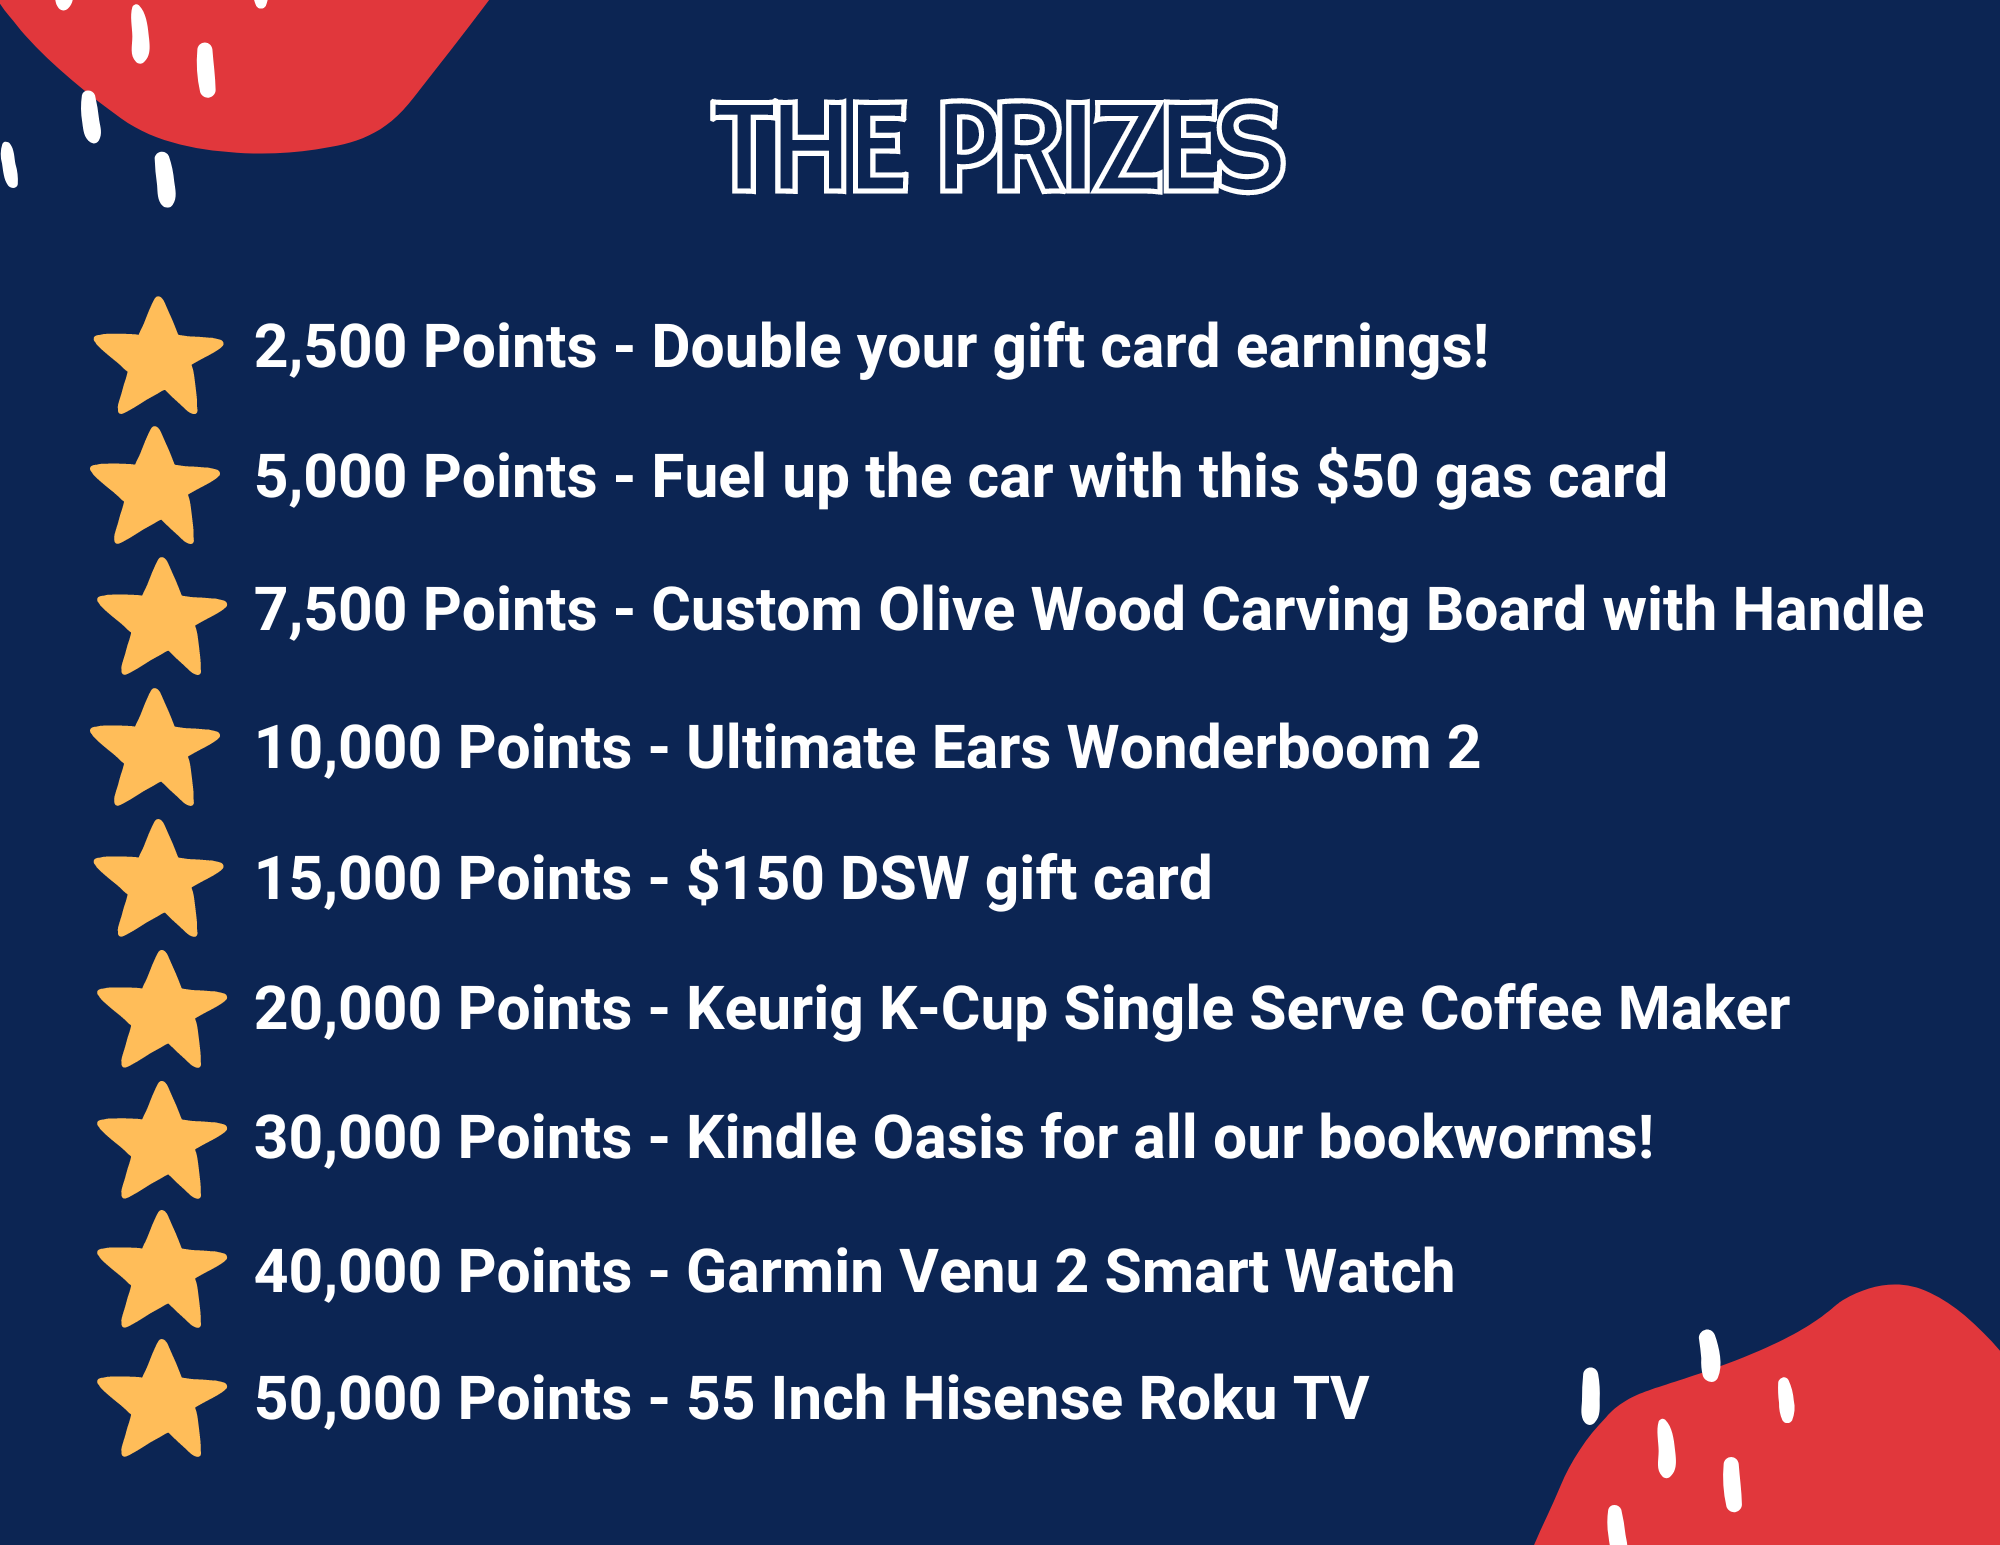 THE PRIZES: 2,500 Points - Double your gift card earnings! ~ 5,000 Points - Fuel up the car with this $50 gas card! ~ 7,500 Points -  Custom Olive Wood Carving Board with Handle ~ 10,000 Points - Ultimate Ears Wonderboom 2 (Portable Speaker) ~ 15,00 Points - Buy a new pair of shoes with this $150 DSW gift card! ~ 20,000 Points - Keurig K-Cup Single Serve Coffee and Latte Maker ~ 30,000 Points - Kindle Oasis for all our bookworms! ~ 40,000 Points - Garmin Venu 2 Smart Watch ~ 50,000 Points - 55 Inch Hisense Roku TV